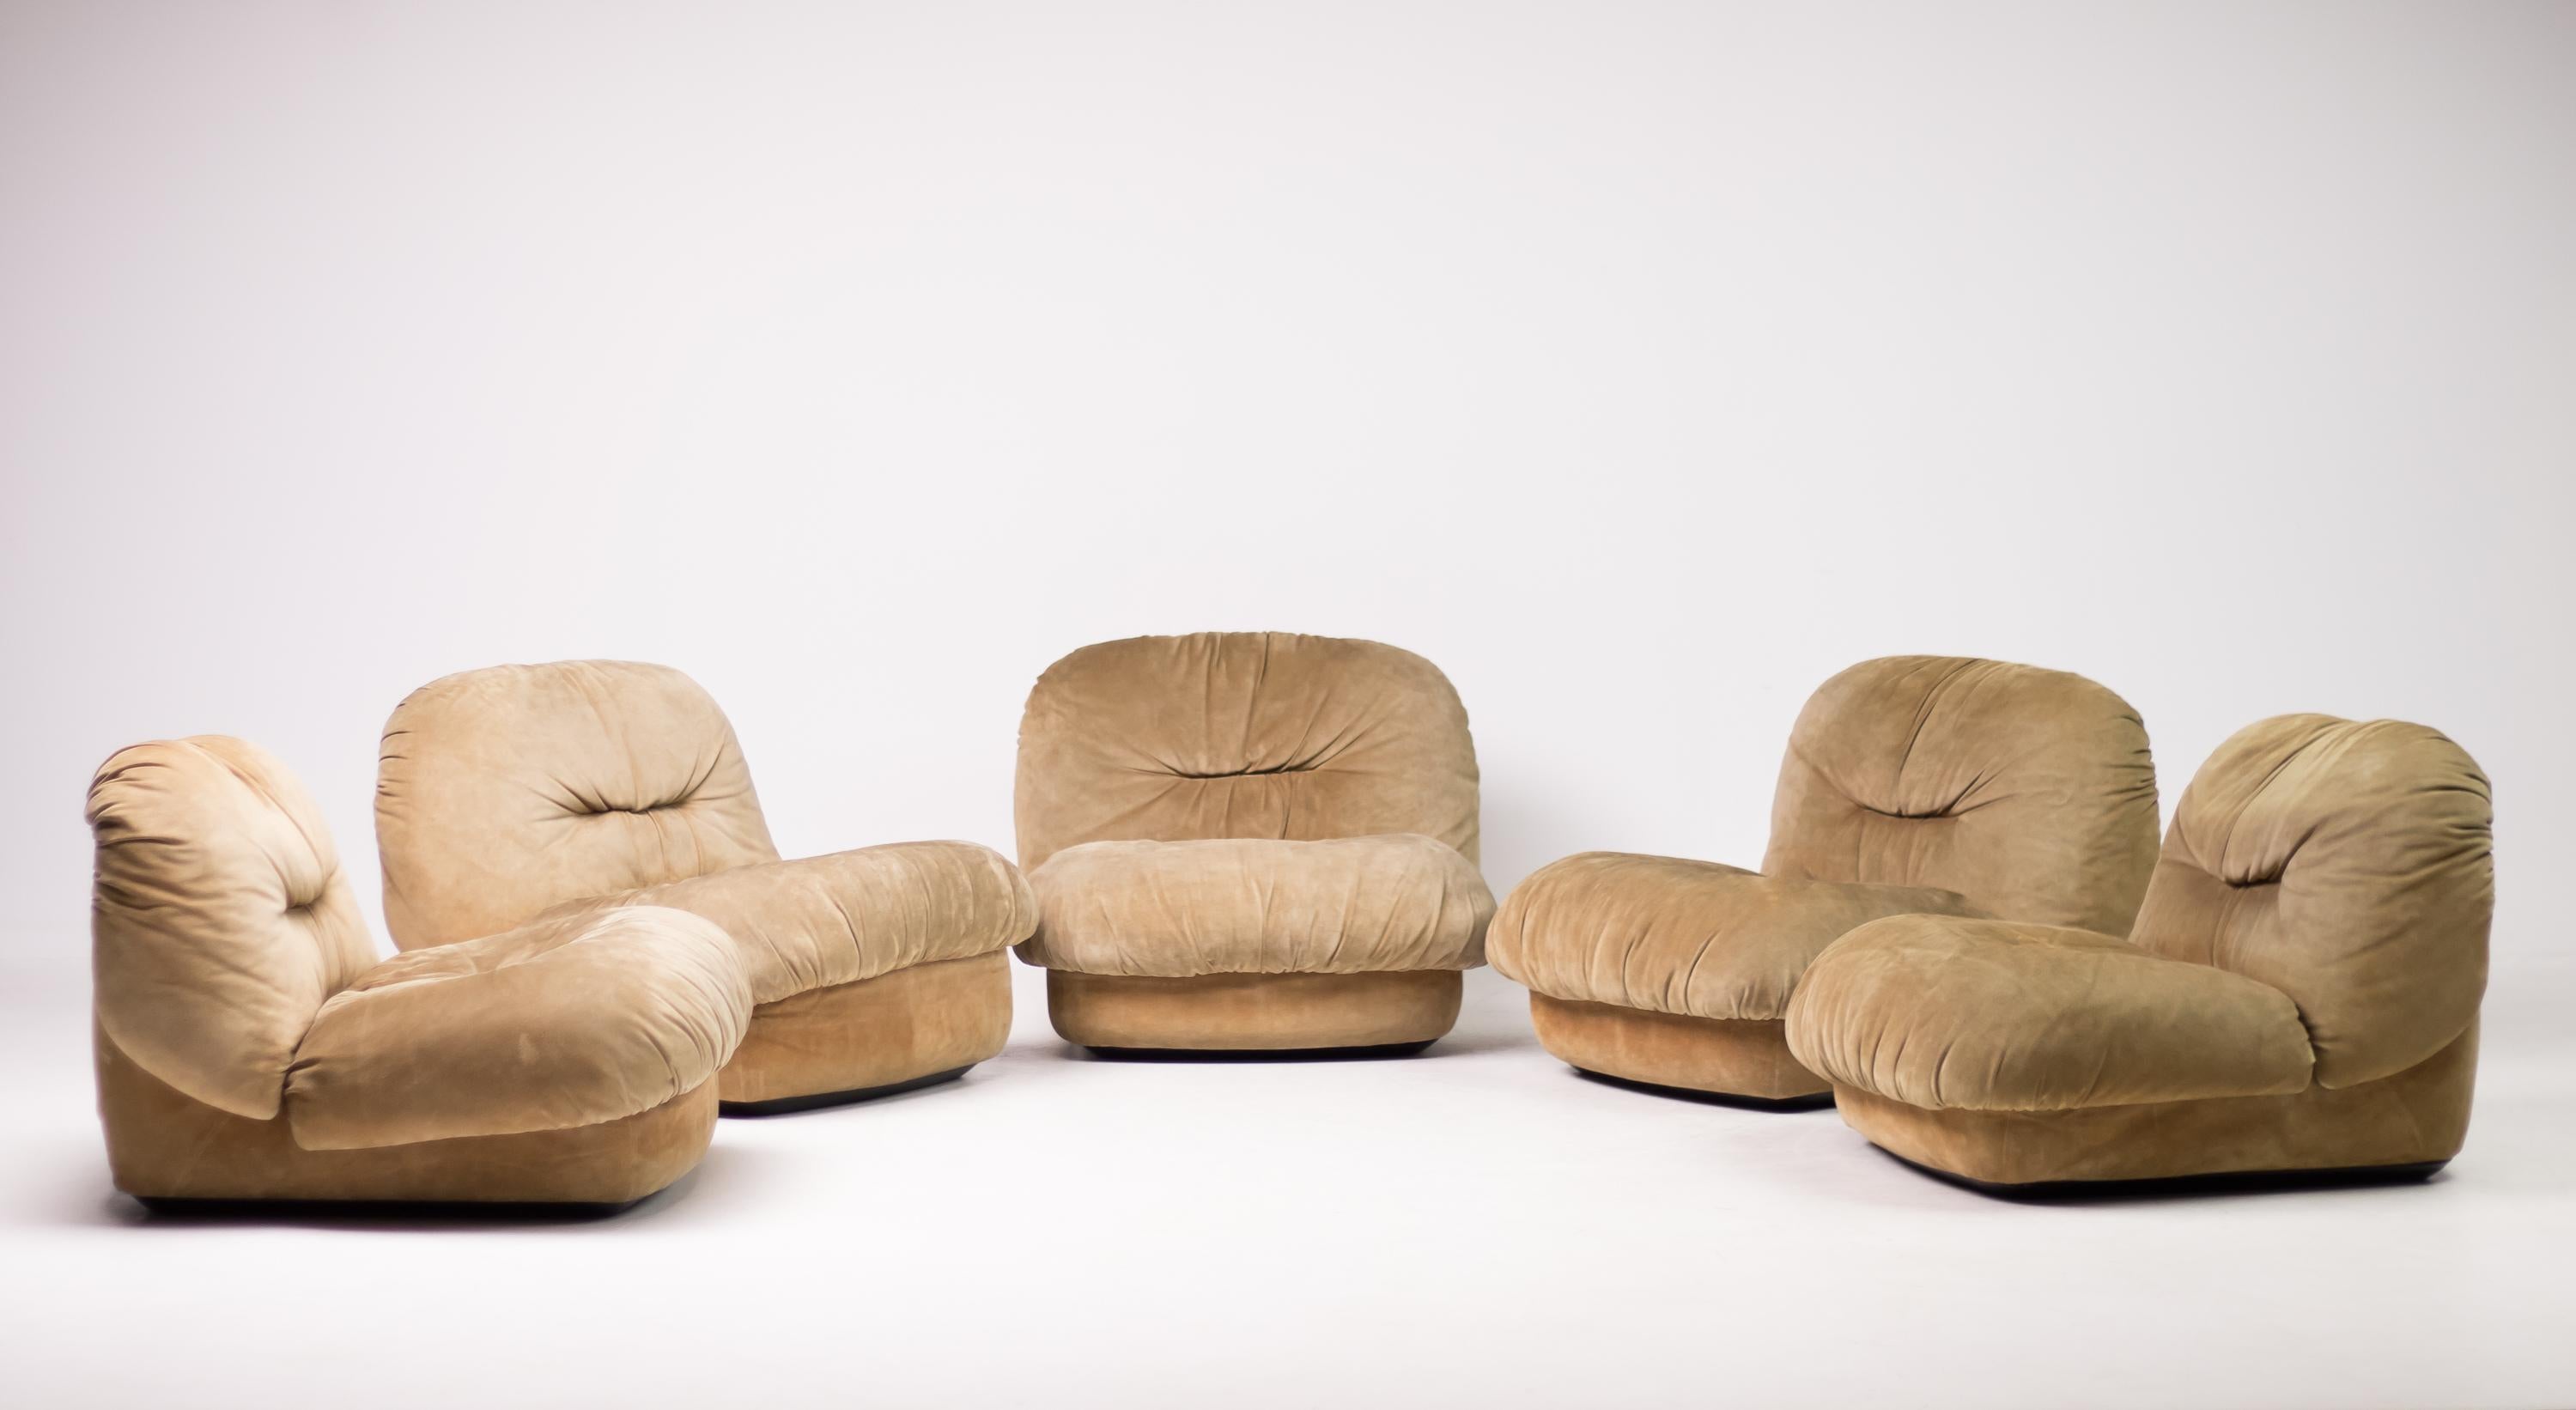 Very rare Maxijumbo modular elements designed by architect Alberto Rosselli for Saporiti.
Can be used as separate lounge chairs or together as a segmented sofa.
Made in butter soft suede, professionally cleaned.
Marked underneath the bases and